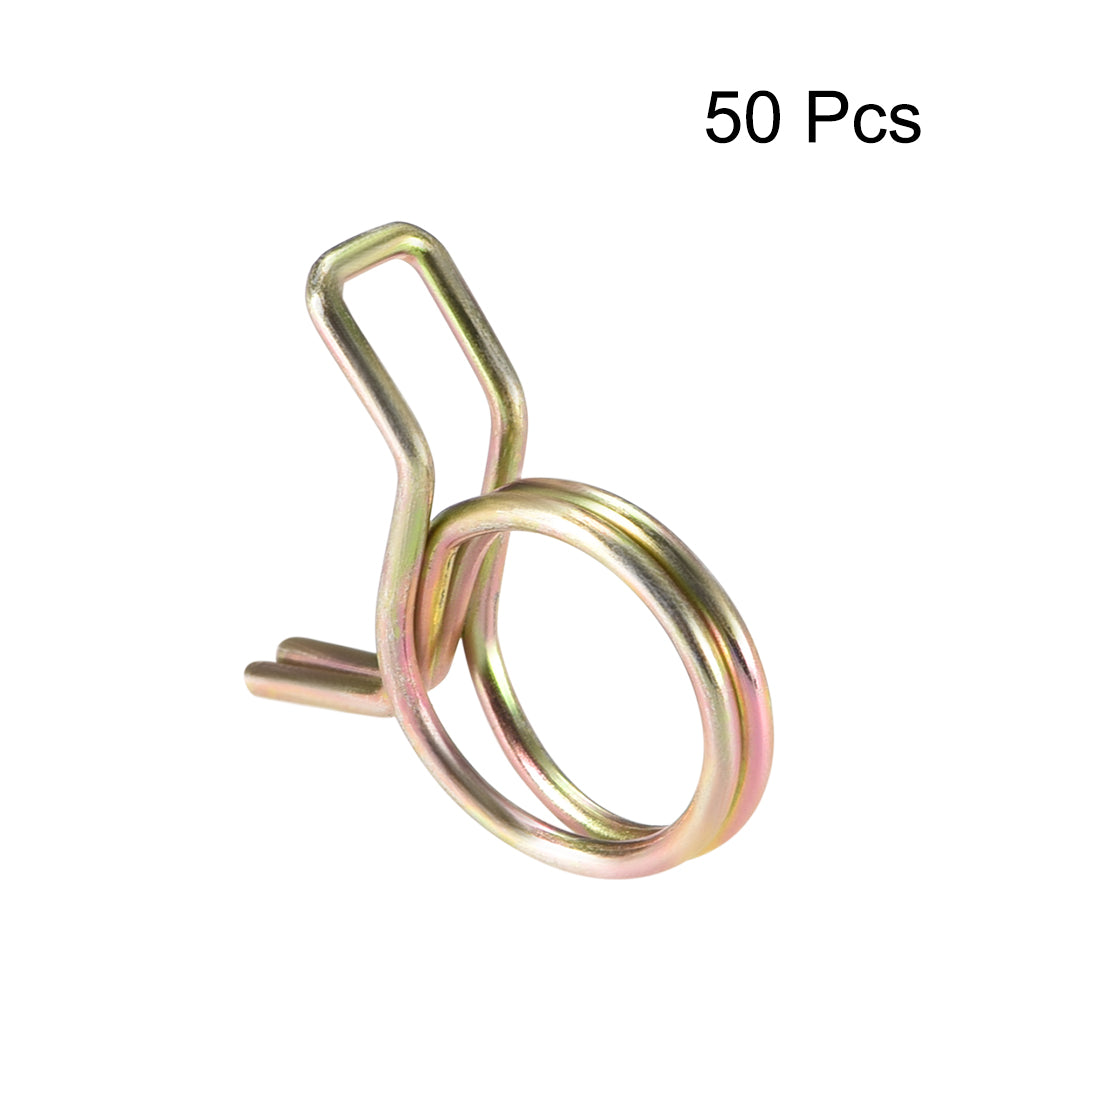 uxcell Uxcell Double Wire Spring Hose Clamp 12mm Fuel Line Tube Spring Clips Zinc Plated 50Pcs